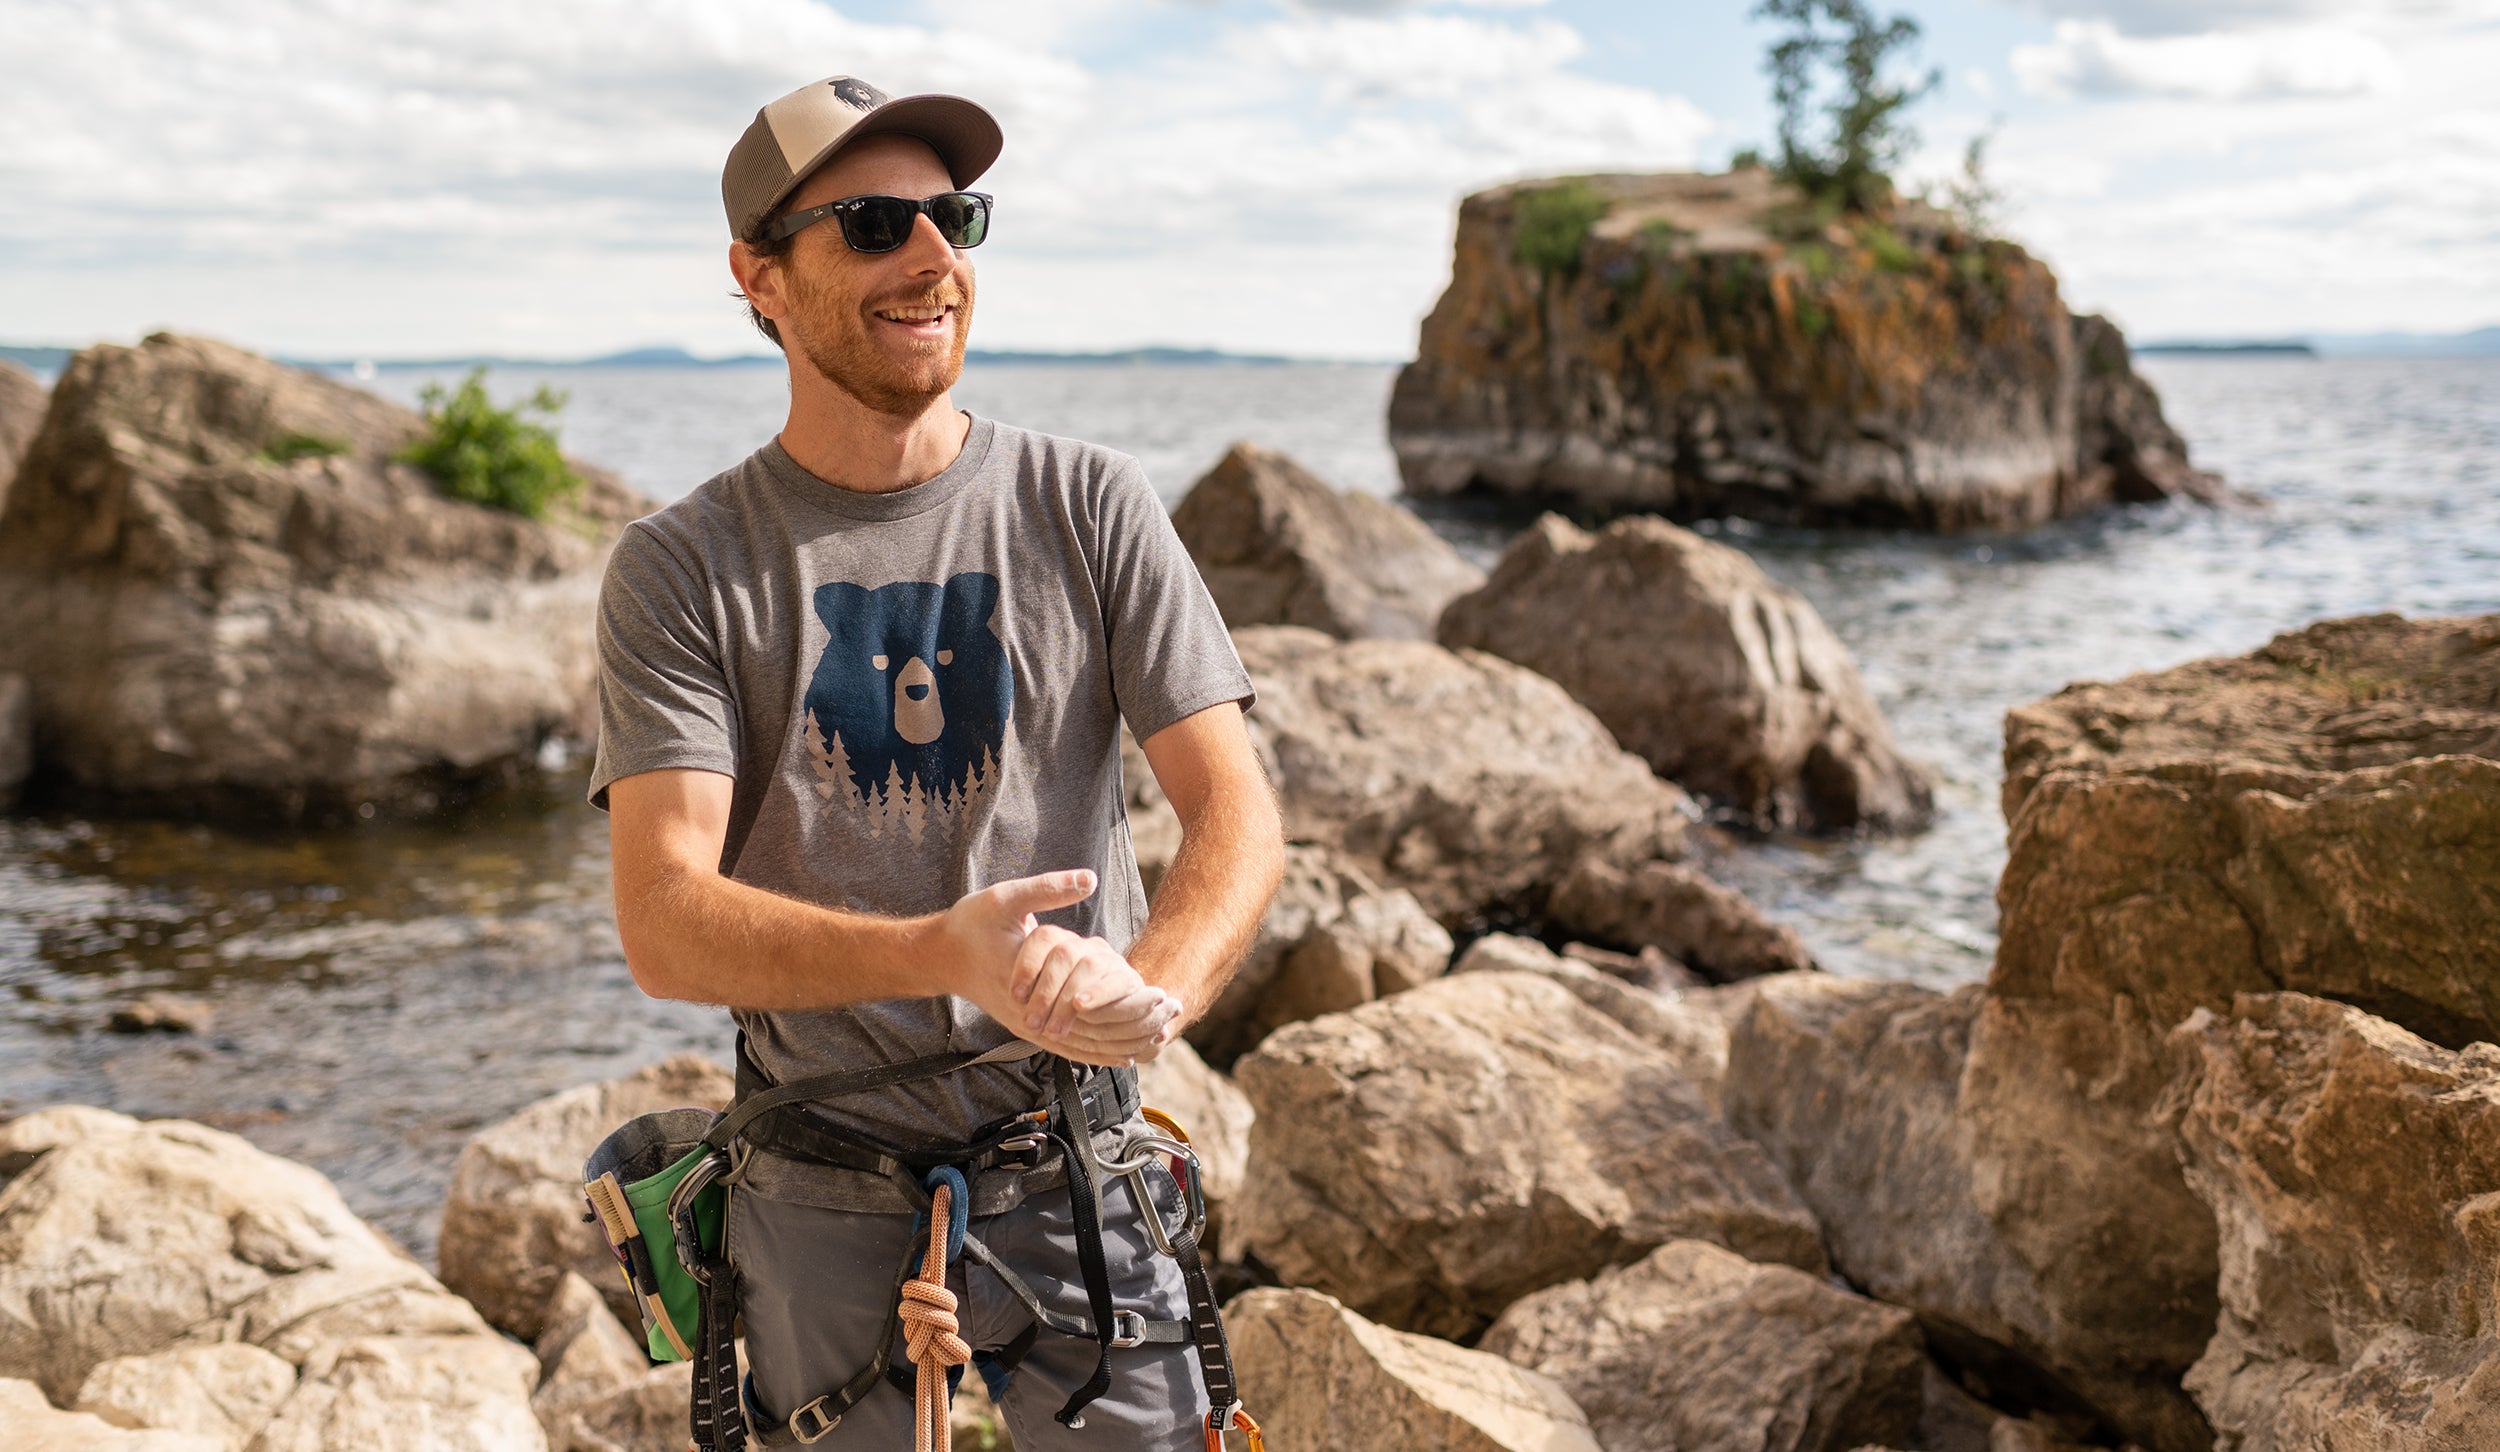 Person in Vermont Eclectic Company t-shirt with rock climbing gear standing on boulders in front of water